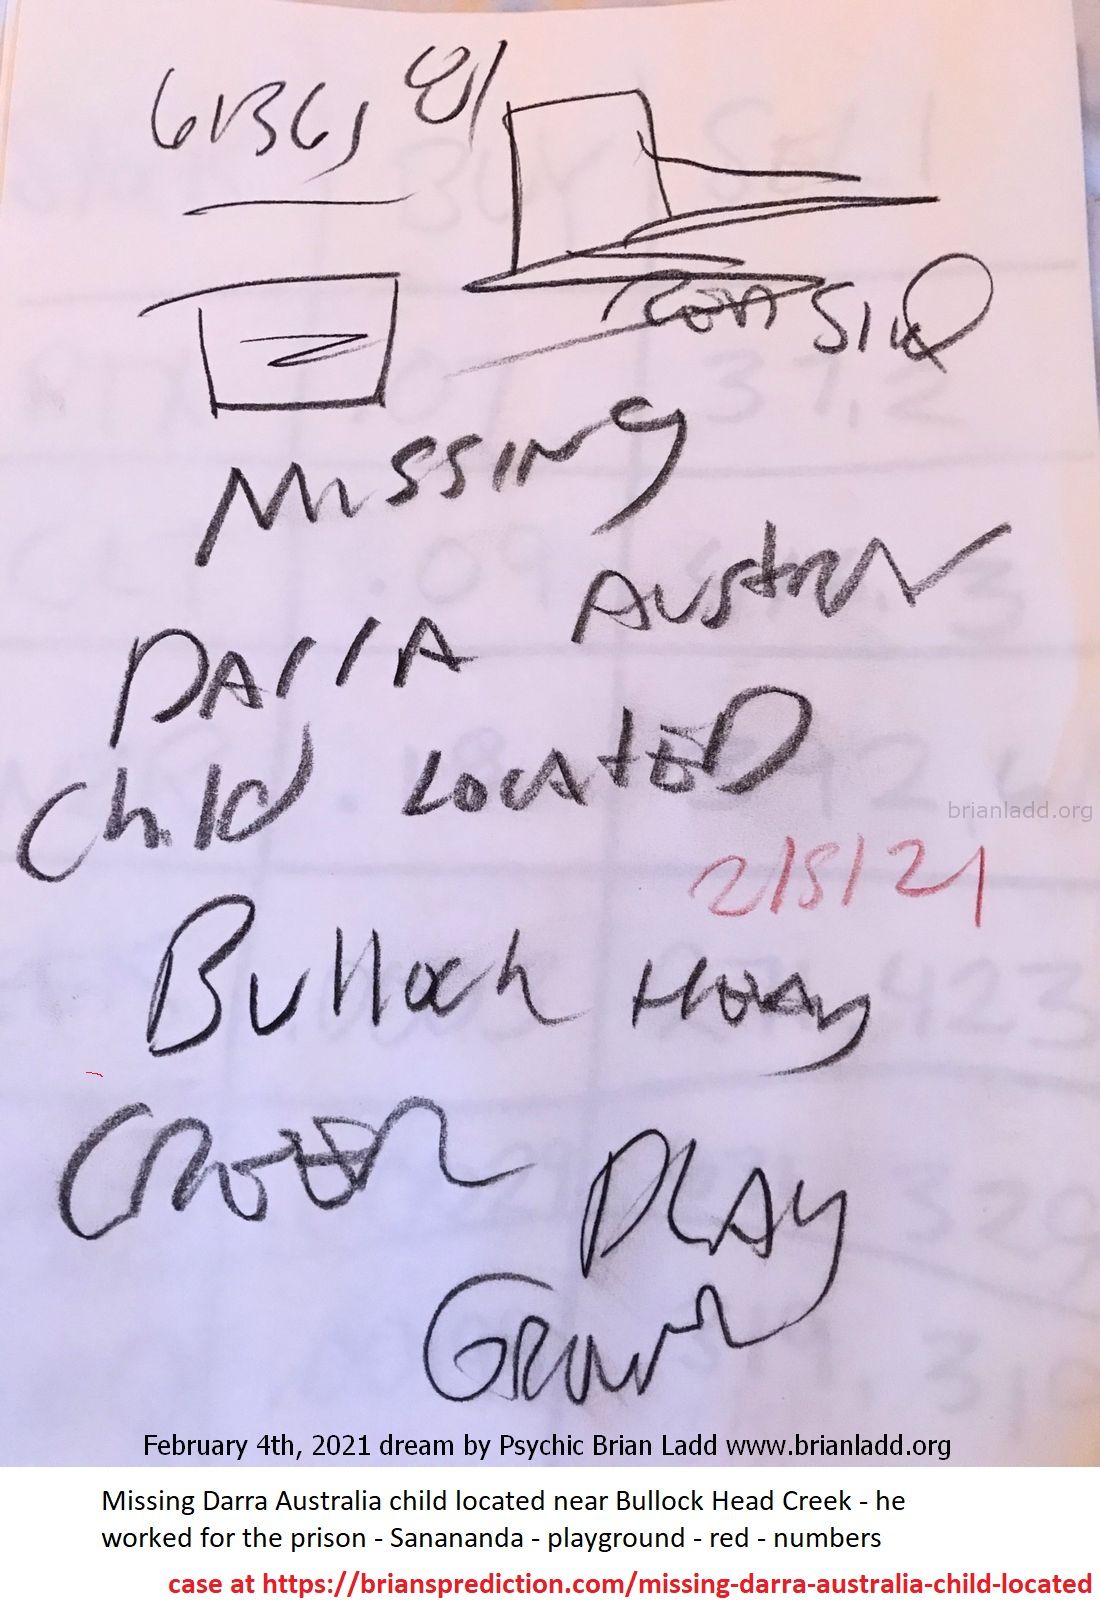 Missing Darra Australia Child Located Near Bullock Head Creek He Worked For The Prison Sanananda Playground Red Numbers ...
Missing Darra Australia Child Located Near Bullock Head Creek - He Worked For The Prison - Sanananda - Playground - Red - Numbers  Case At   https://briansprediction.com/Missing-Darra-Australia-Child-located
